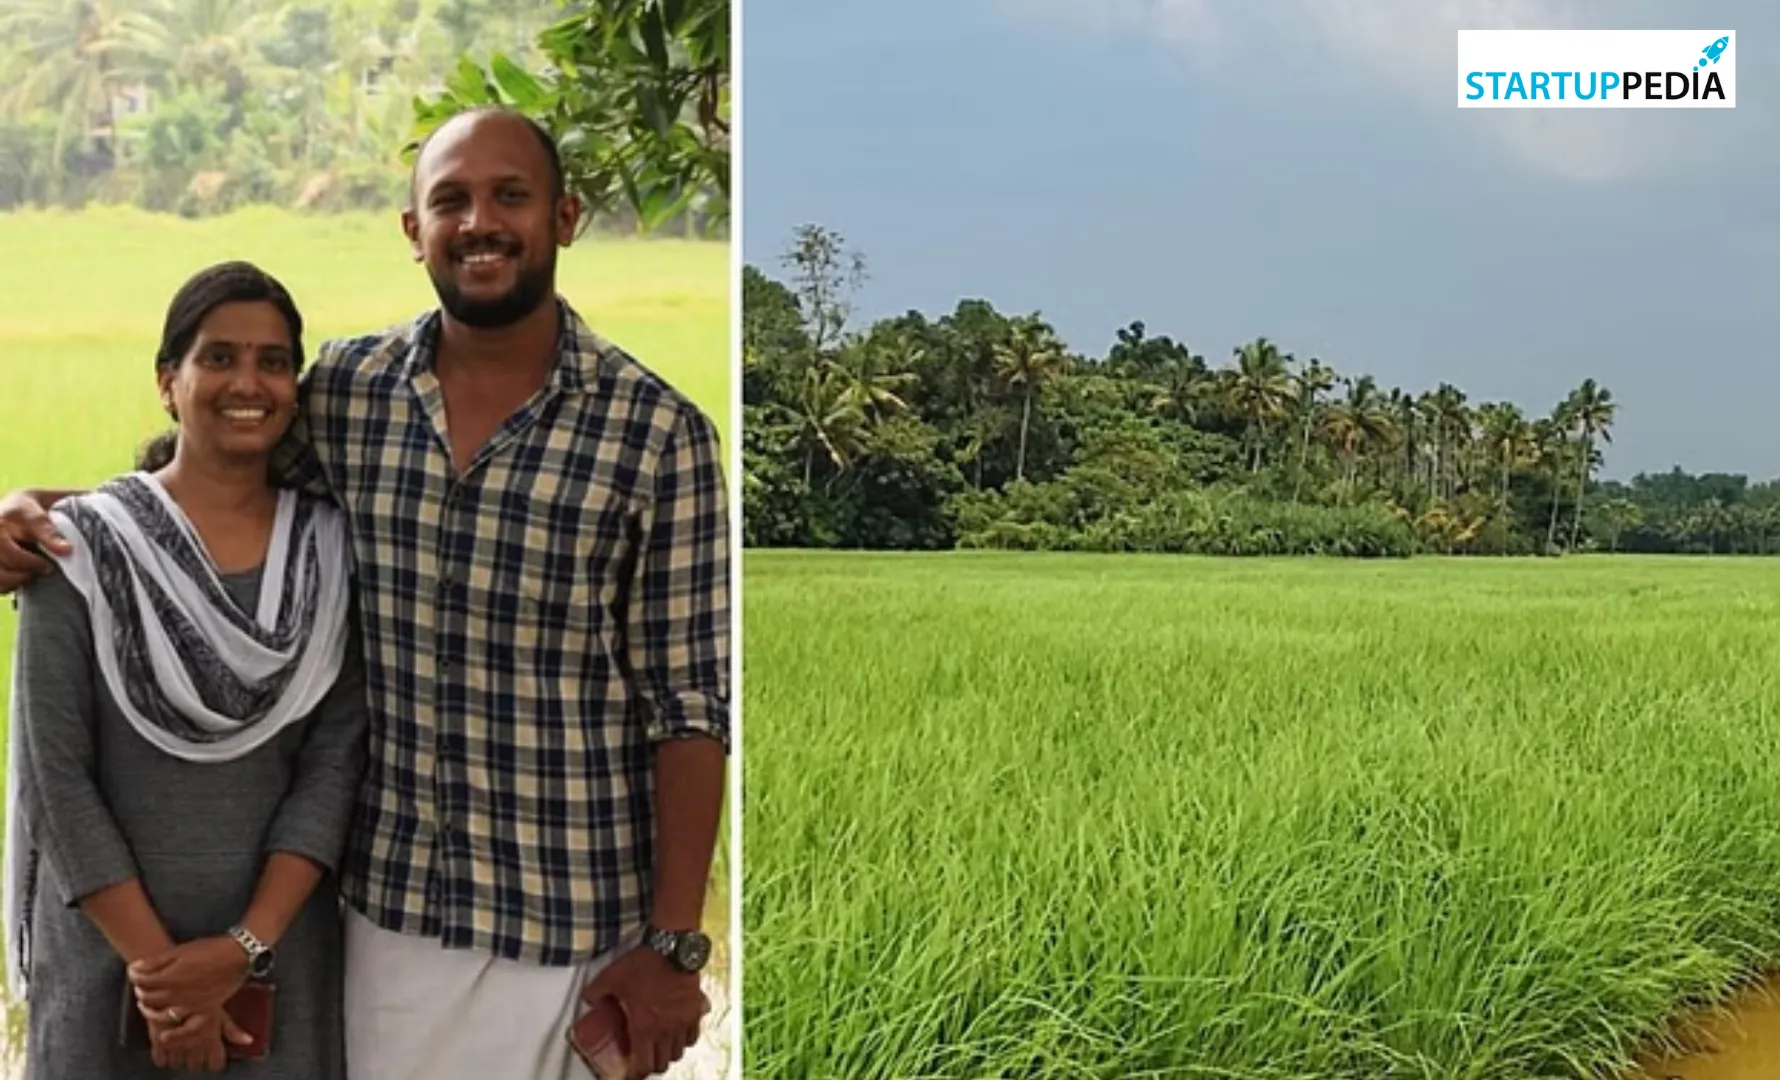 This Kerala couple leaves jobs to cultivate 7 conventional rice varieties in 15 acres and produce 15 tonnes annually